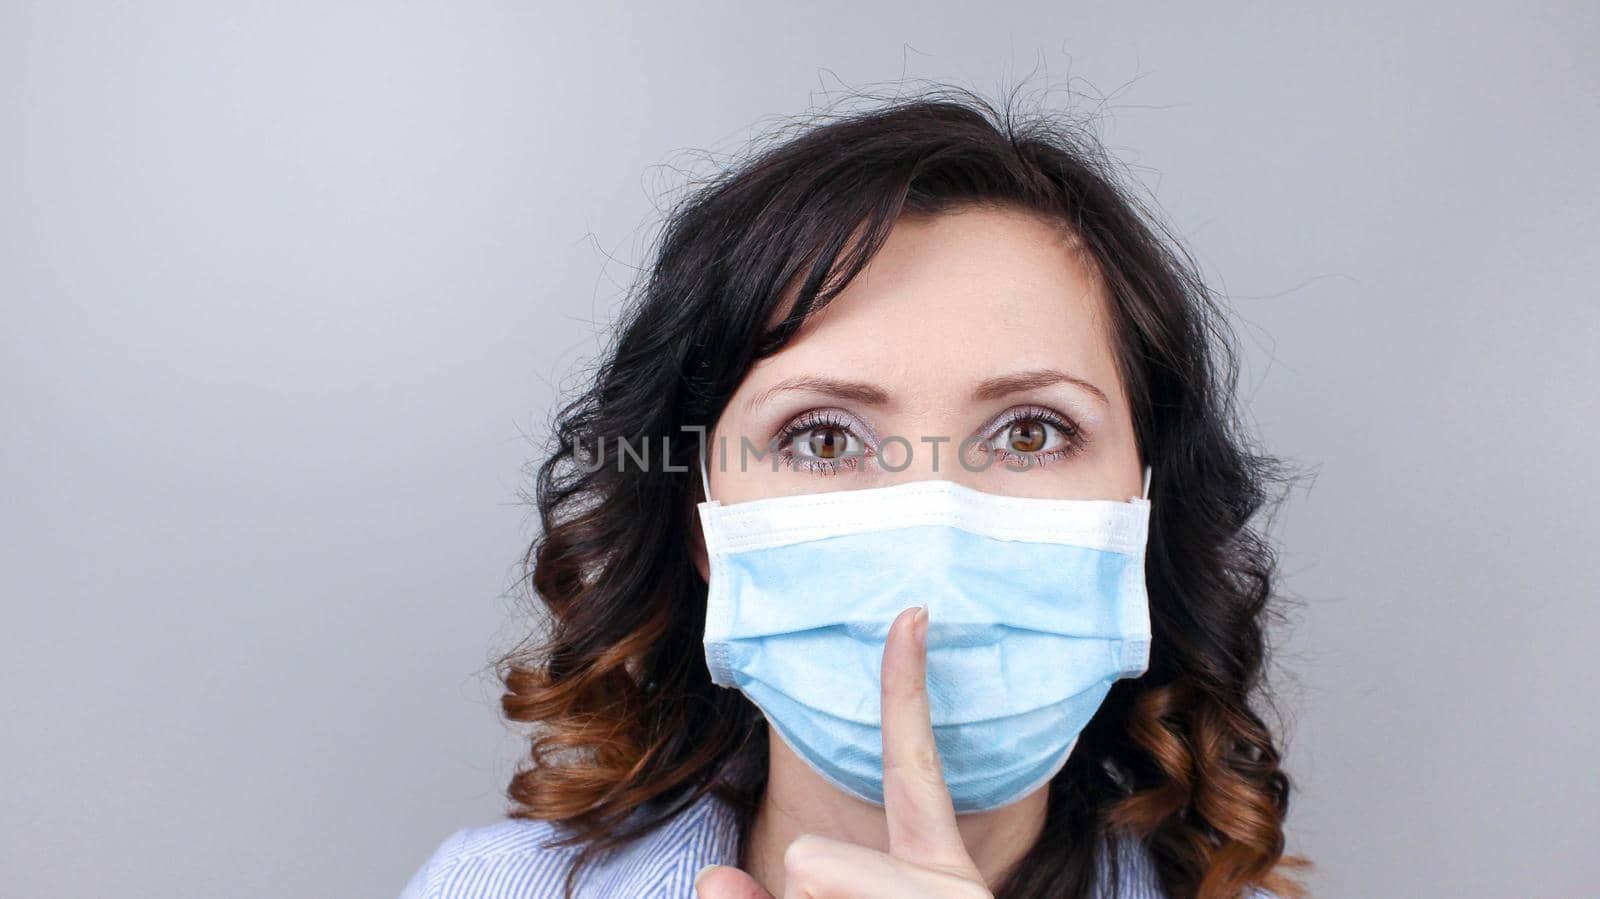 Woman in medical face mask shows finger gesture to be quiet by JuliaDorian